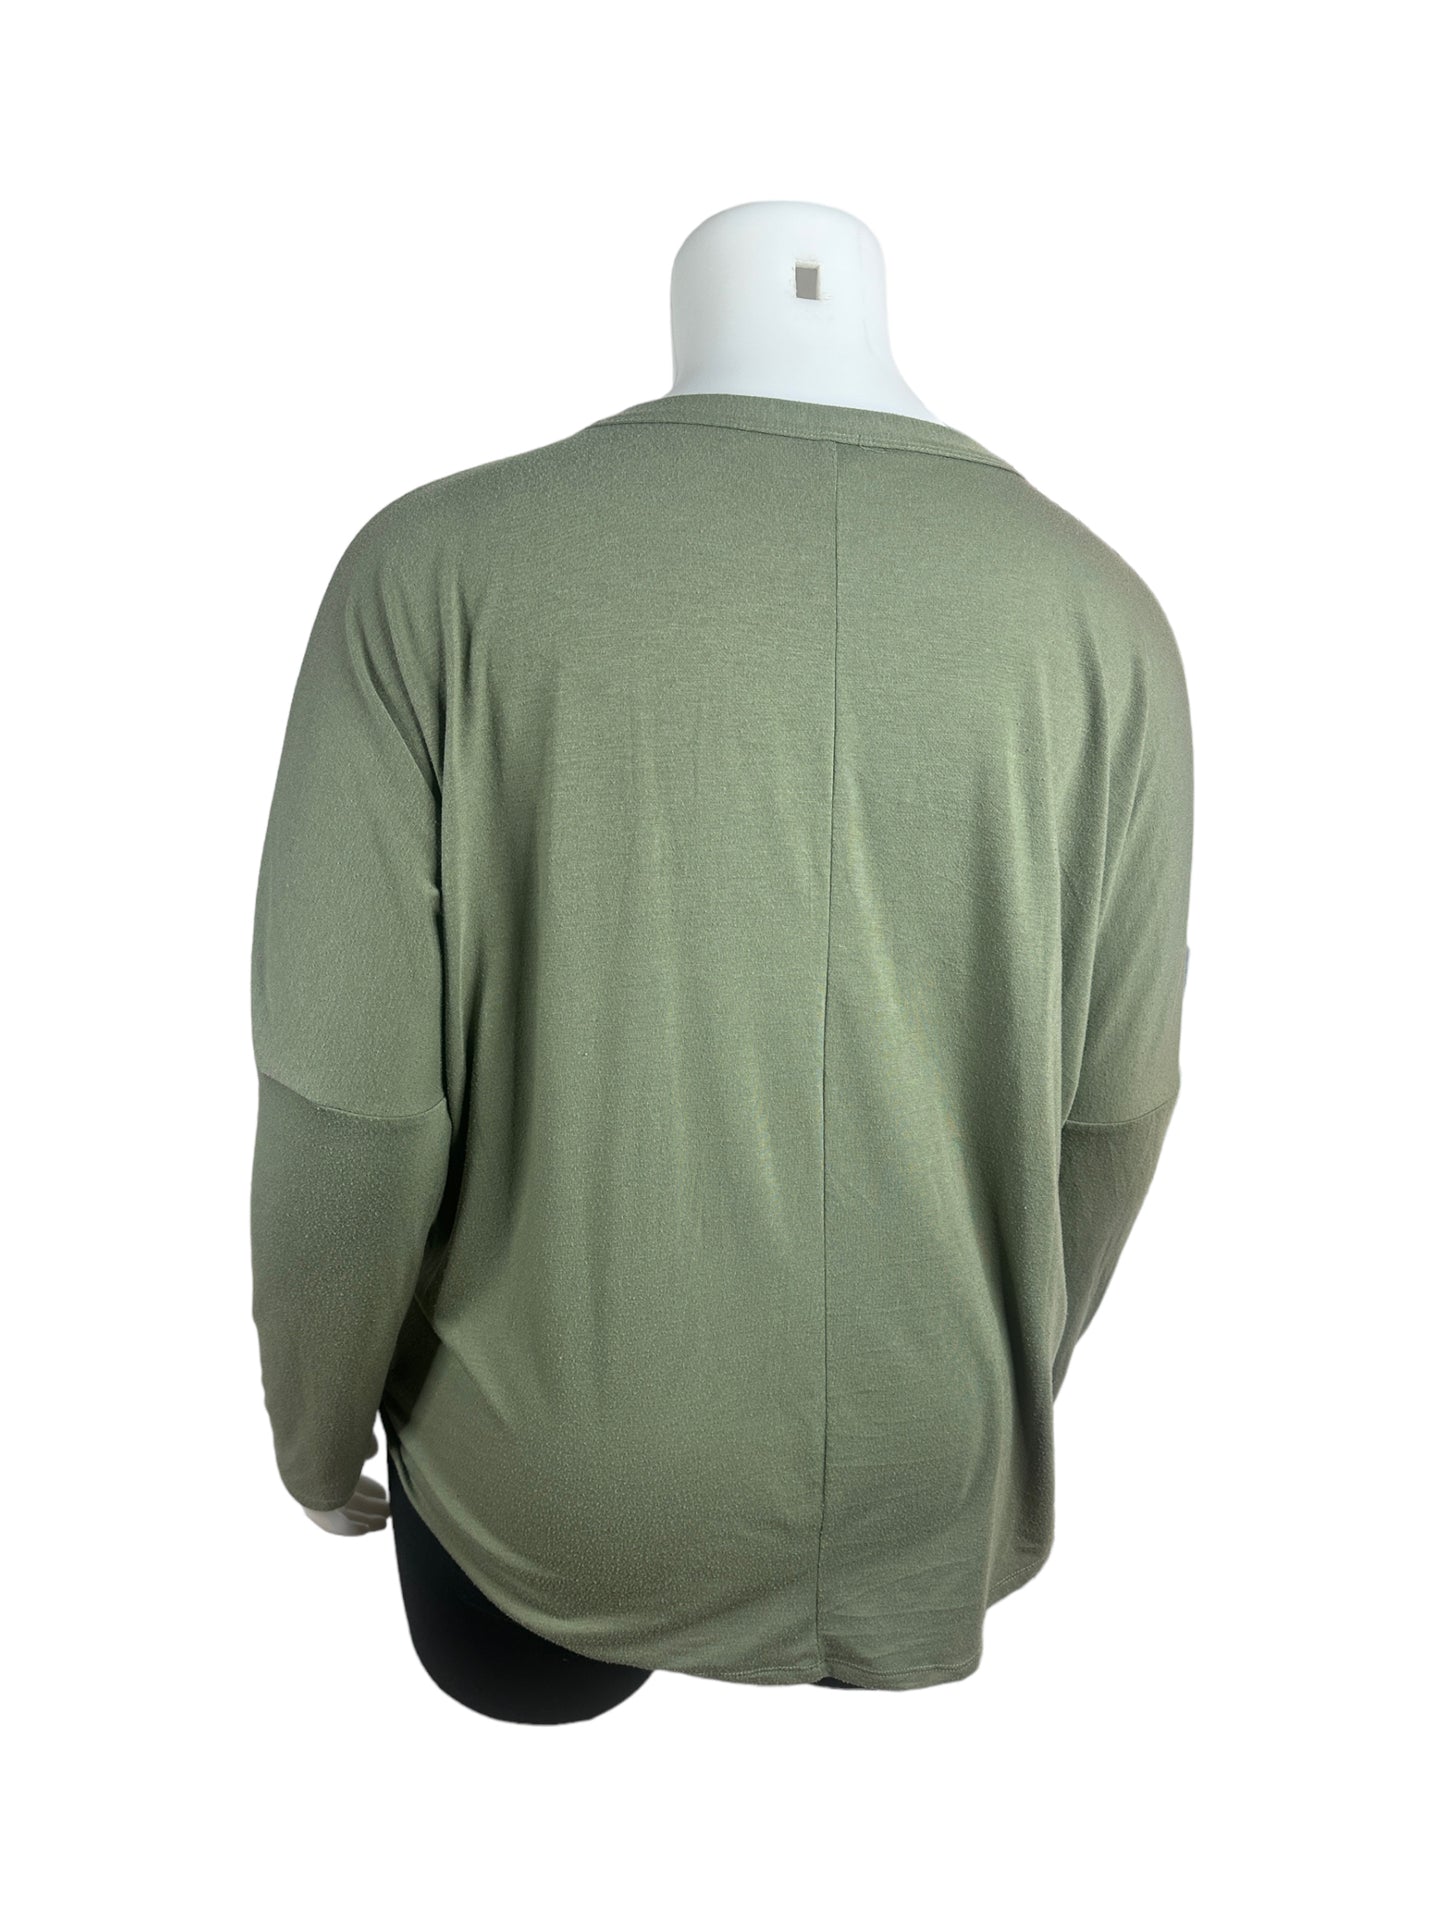 "Zenana Premium" Green Long-sleeve Shirt with Buttons and Tie(1X)